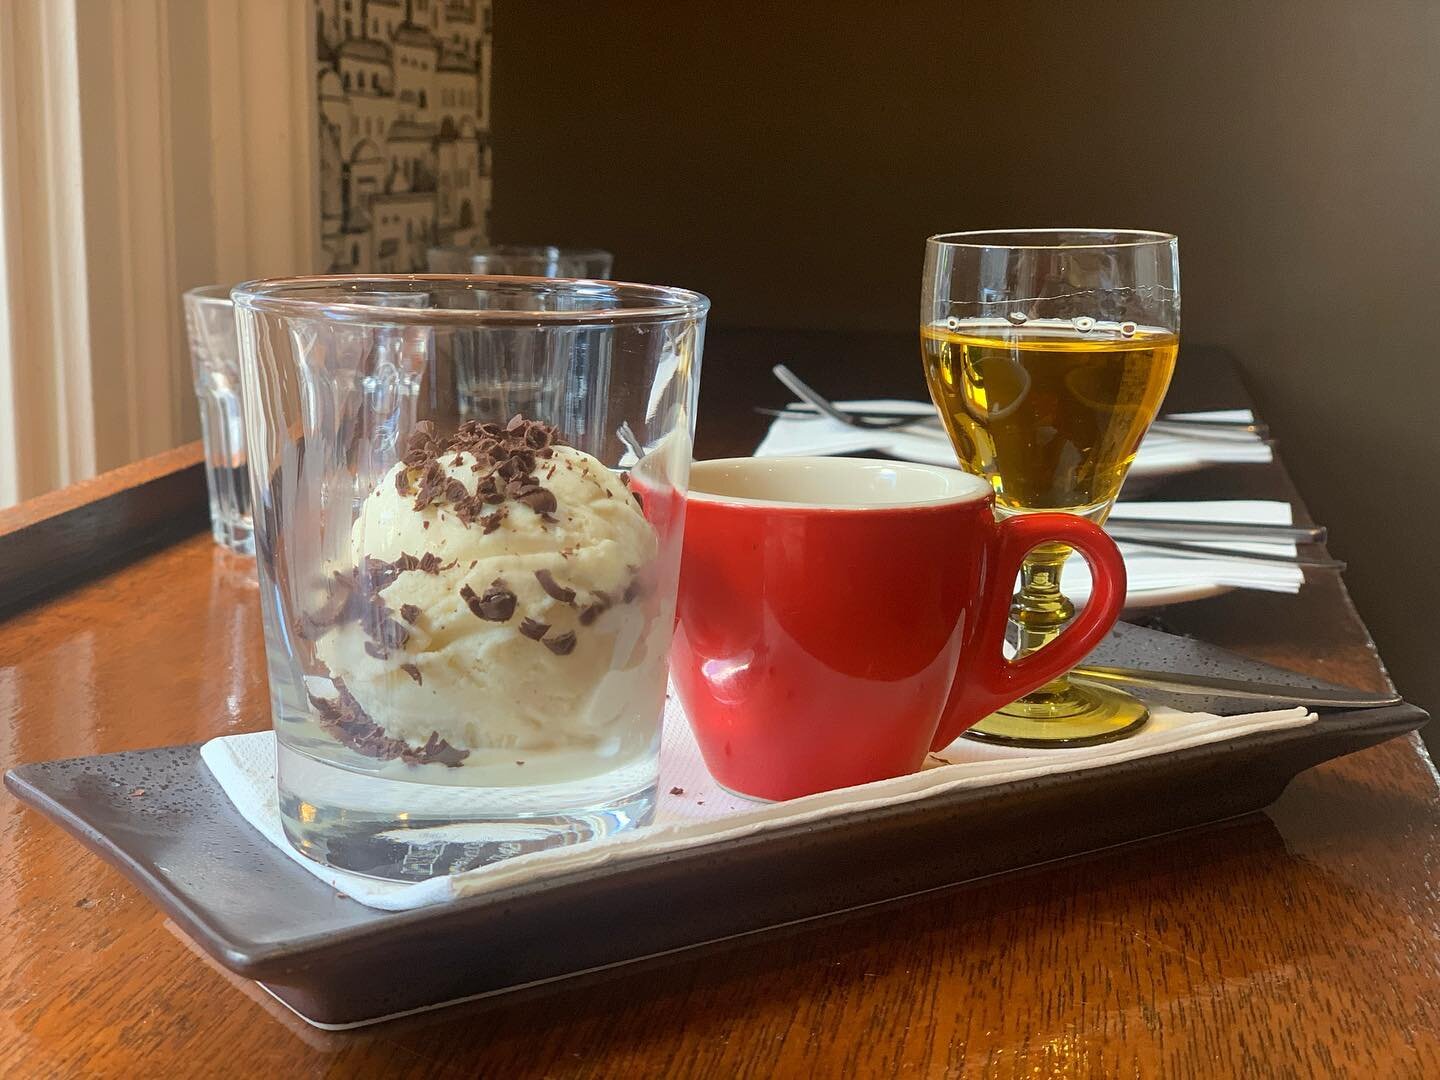 Affogato with Licor 43 is a real Spanish drink&hellip; Keep forgetting it is born in Italy! 😉#sharingiscaring #affogatospanishway #lovebocados #visitnewcastle_aus